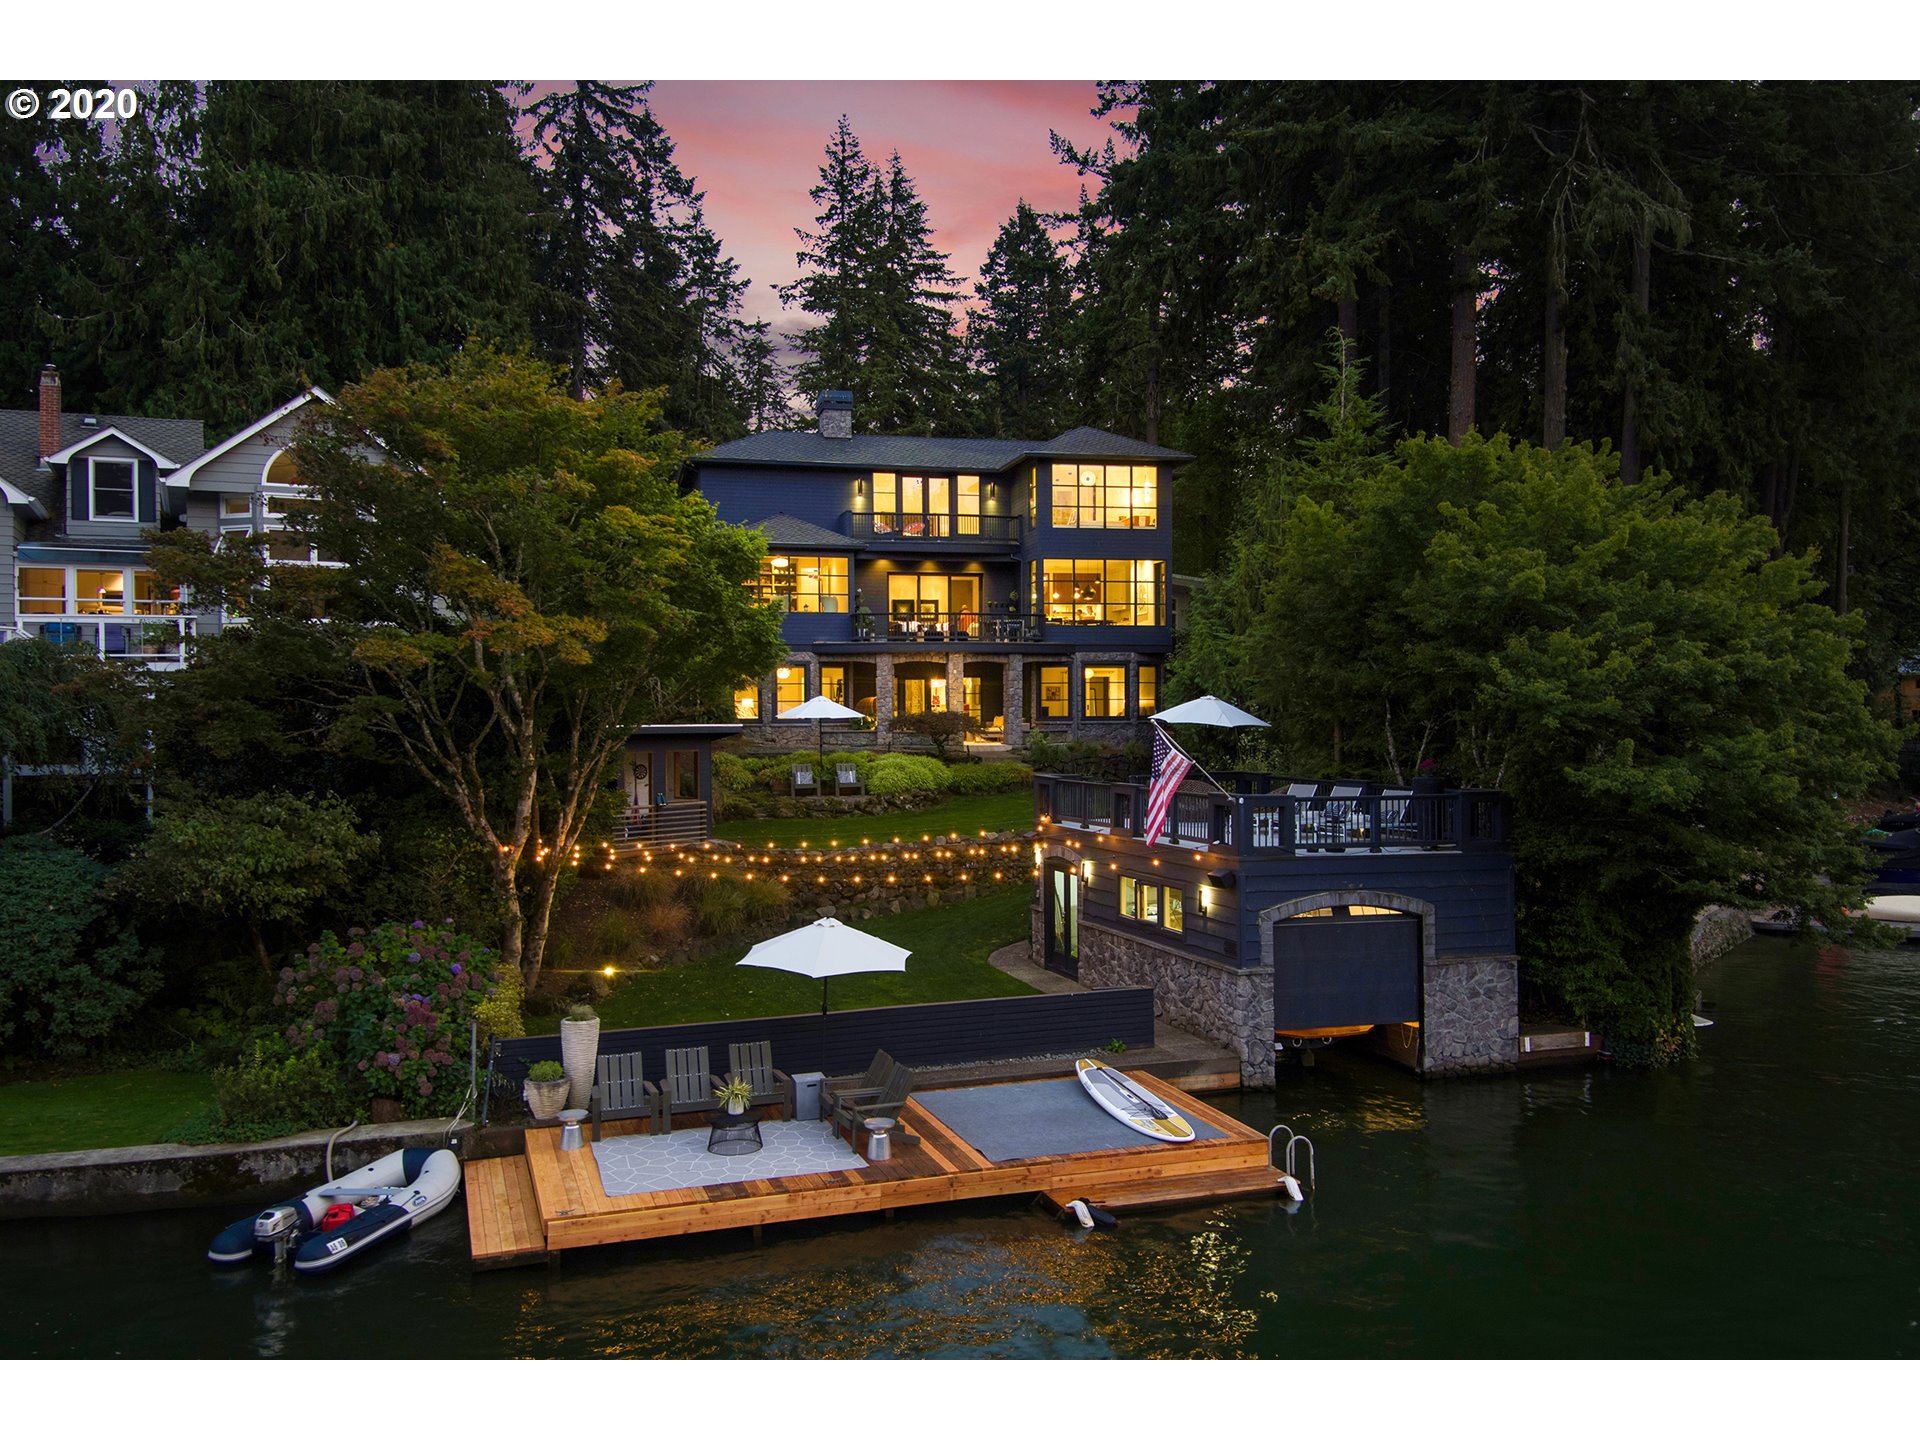 This lakefront home is truly a modern metamorphosis. Completely reimagined in 2014, it defines approachable luxury. Open flow on all 3 levels for indoor/outdoor livability. Carefully curated palette & impeccable finishes-walnut, marble & glass. Lush grounds, pvt dock & boathouse w/ lift. Lake views from every rm are your personal modern art. Designer lighting, gmt kit w/ lrg island, lrg sliding pocket glass doors, walnut flrs & custom details thru-out. All the best that lake life has to offer!